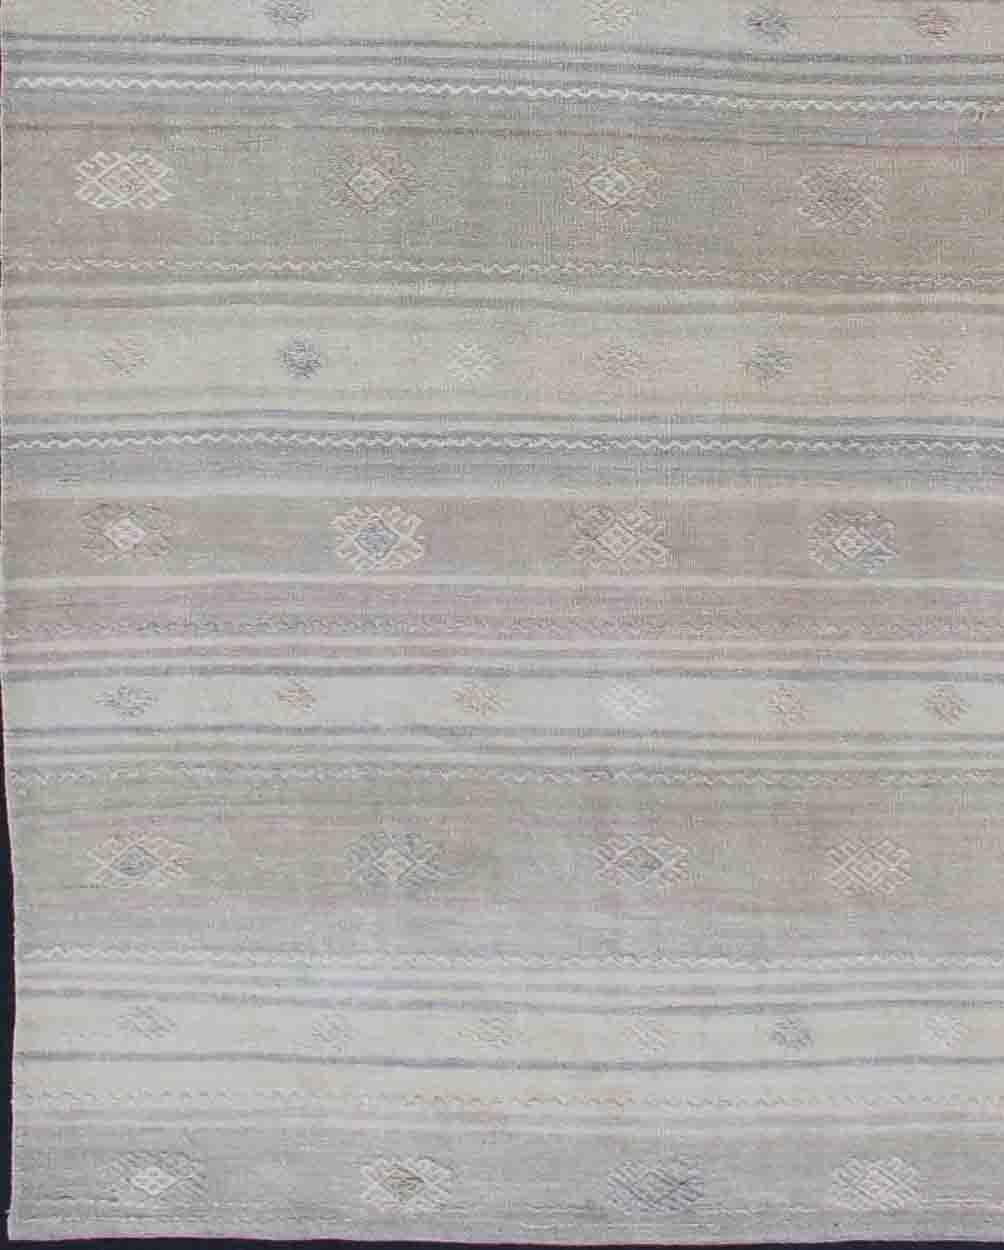 Vintage Turkish Kilim Runner with Stripes, Keivan Woven Arts / rug EN-176426, country of origin / type: Turkey / Kilim, circa mid-20th Century.

Featuring a repeating horizontal stripe design, with an assortment of geometric motifs throughout,